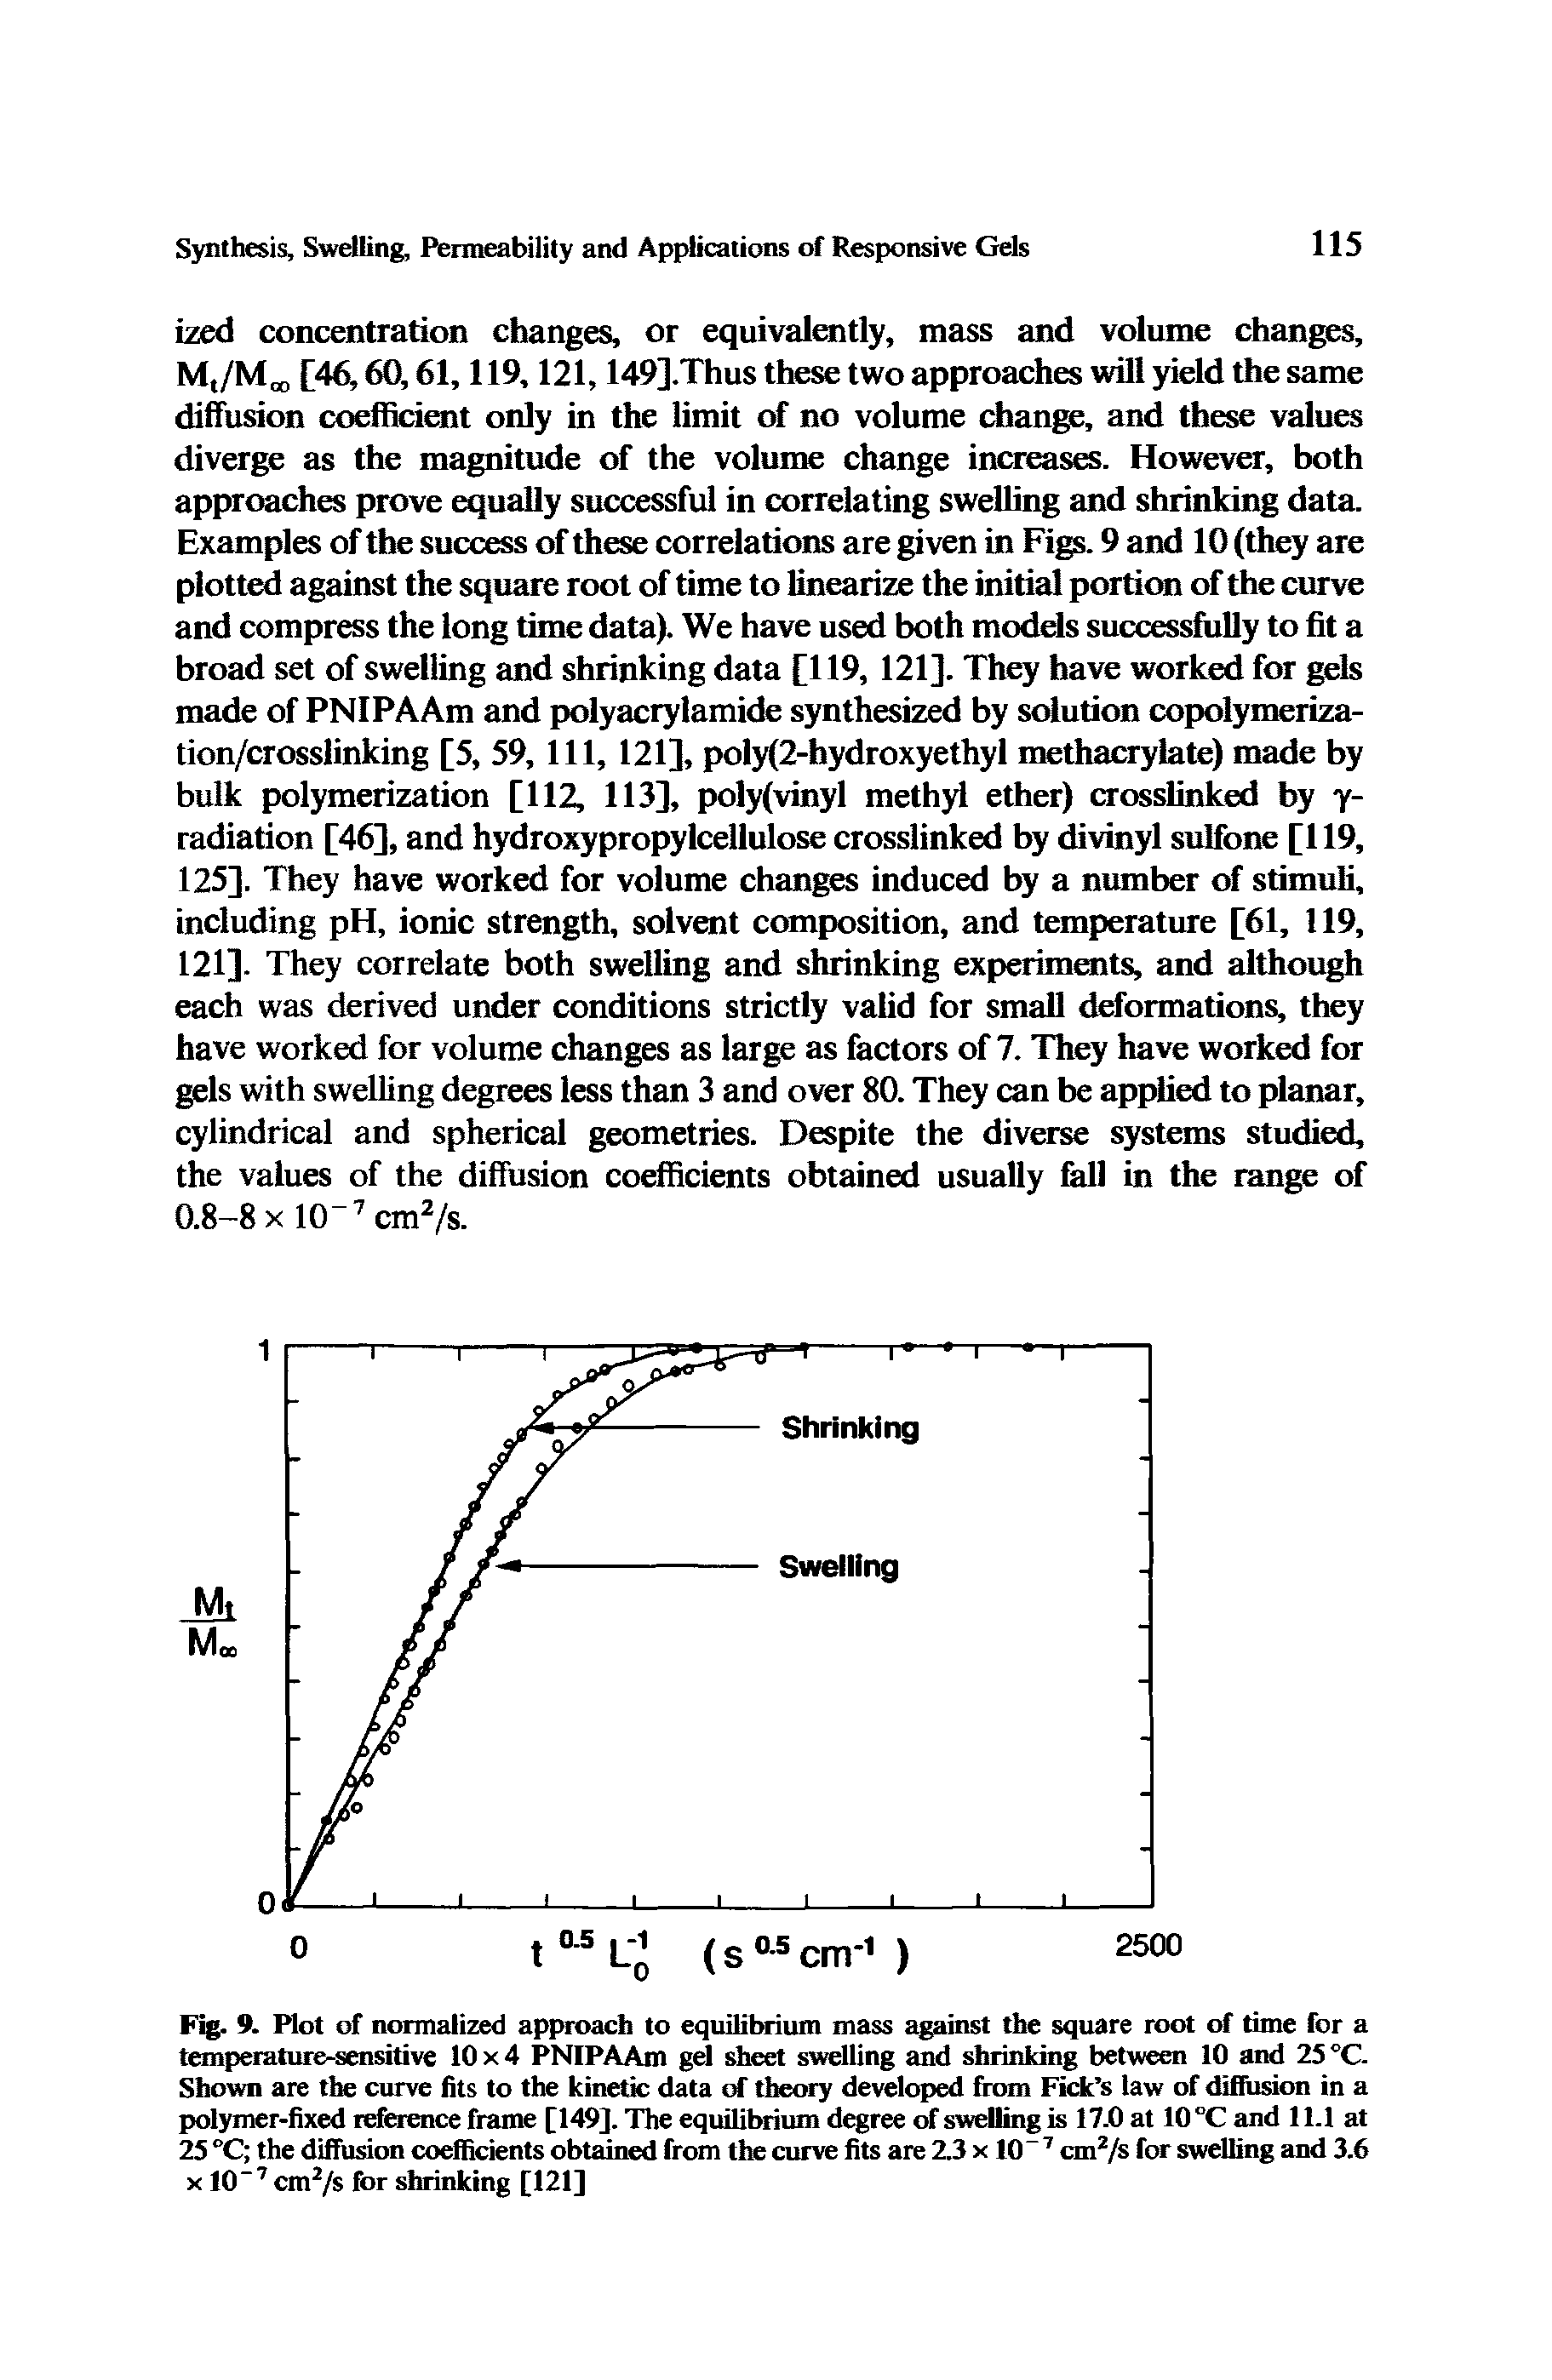 Fig. 9. Plot of normalized approach to equilibrium mass against the square root of time for a temperature-sensitive 10 x 4 PNIPAAm gel sheet swelling and shrinking between 10 and 25 °C-Shown are the curve fits to the kinetic data of theory developed from Fick s law of diffusion in a polymer-fixed reference frame [149]. The equilibrium degree of swelling is 17.0 at 10 °C and 11.1 at 25 °C the diffusion coefficients obtained from the curve fits are 2.3 x 10 7 cm2/s for swelling and 3.6 x 10 7 cm2/s for shrinking [121]...